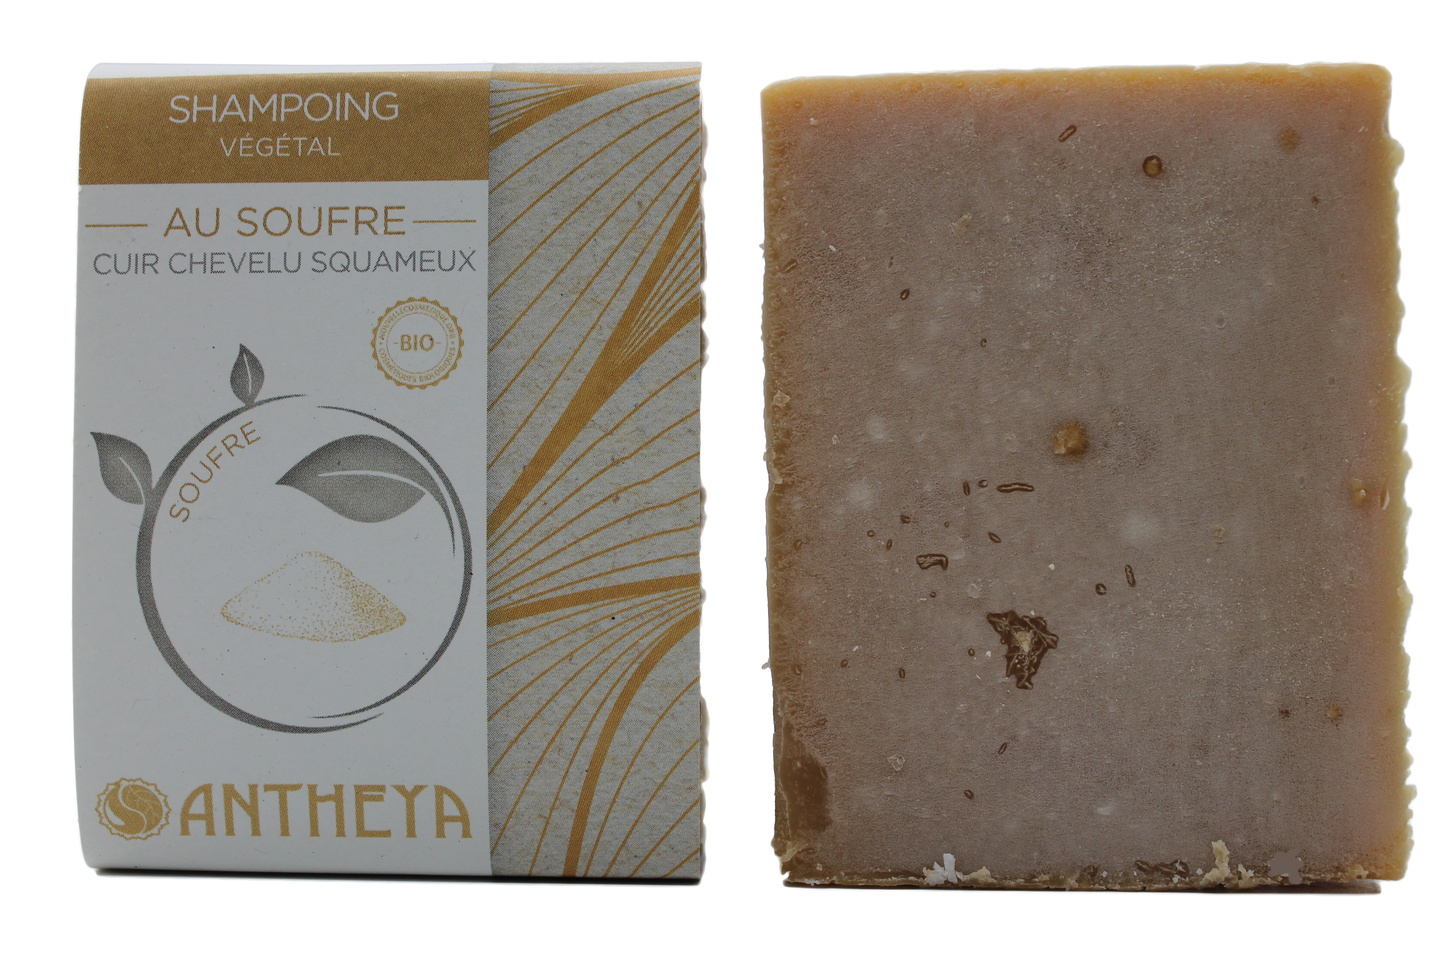 Antheya -- Shampoing solide au soufre - cuir chevelu squameux (bande papier) - 100 g